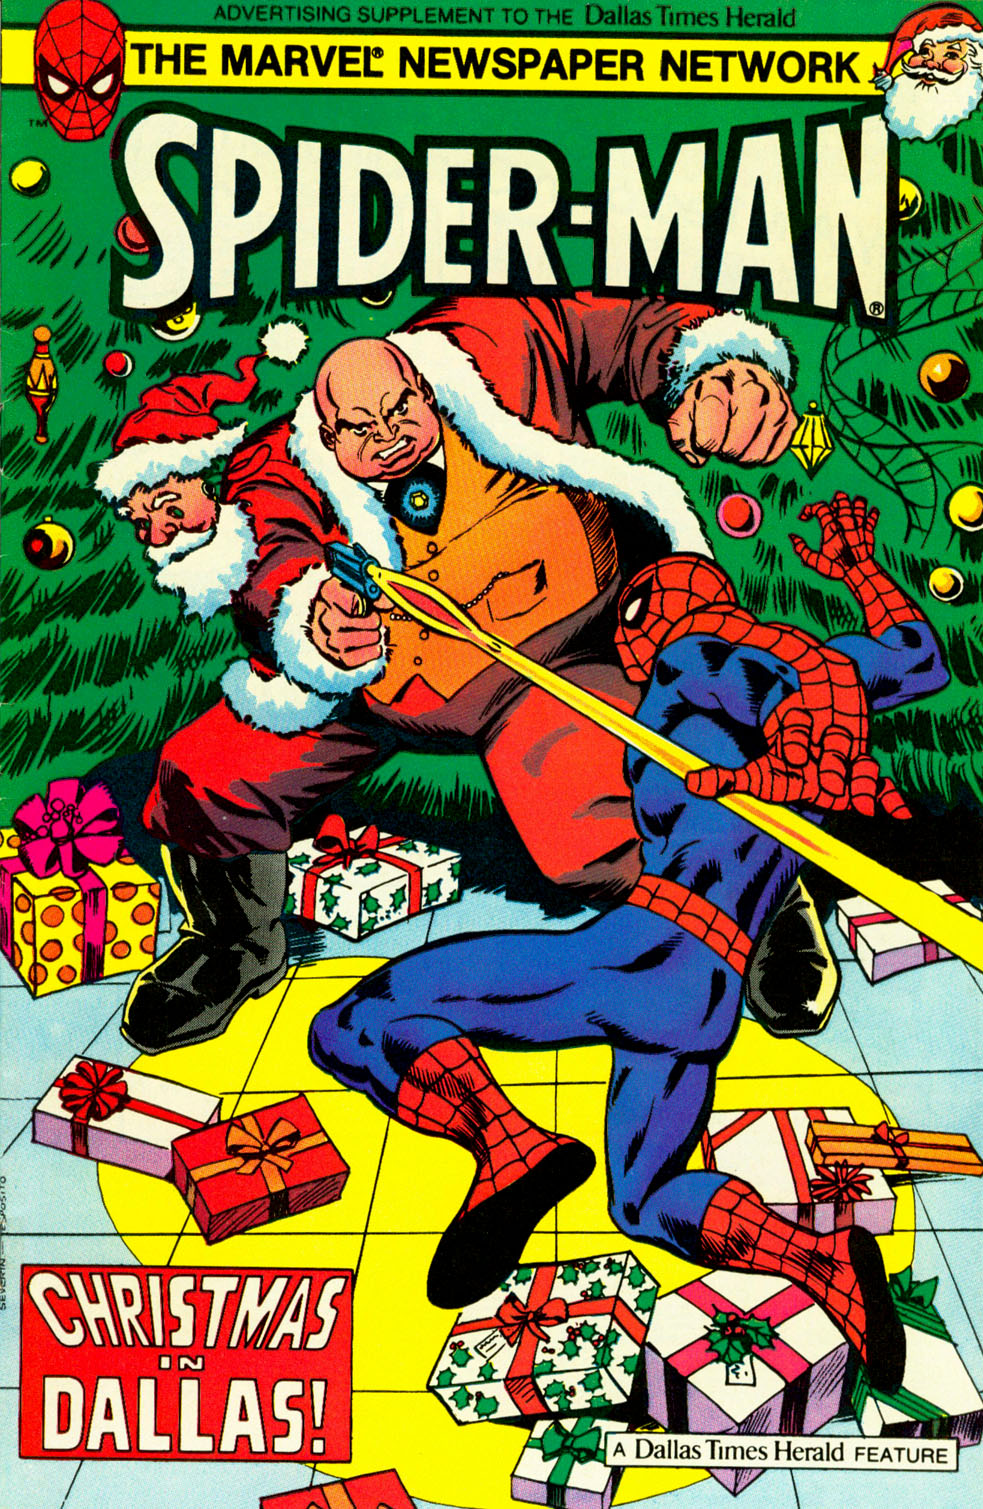 Cover Story: Crazy Christmas Comic Covers – Behind The Panels